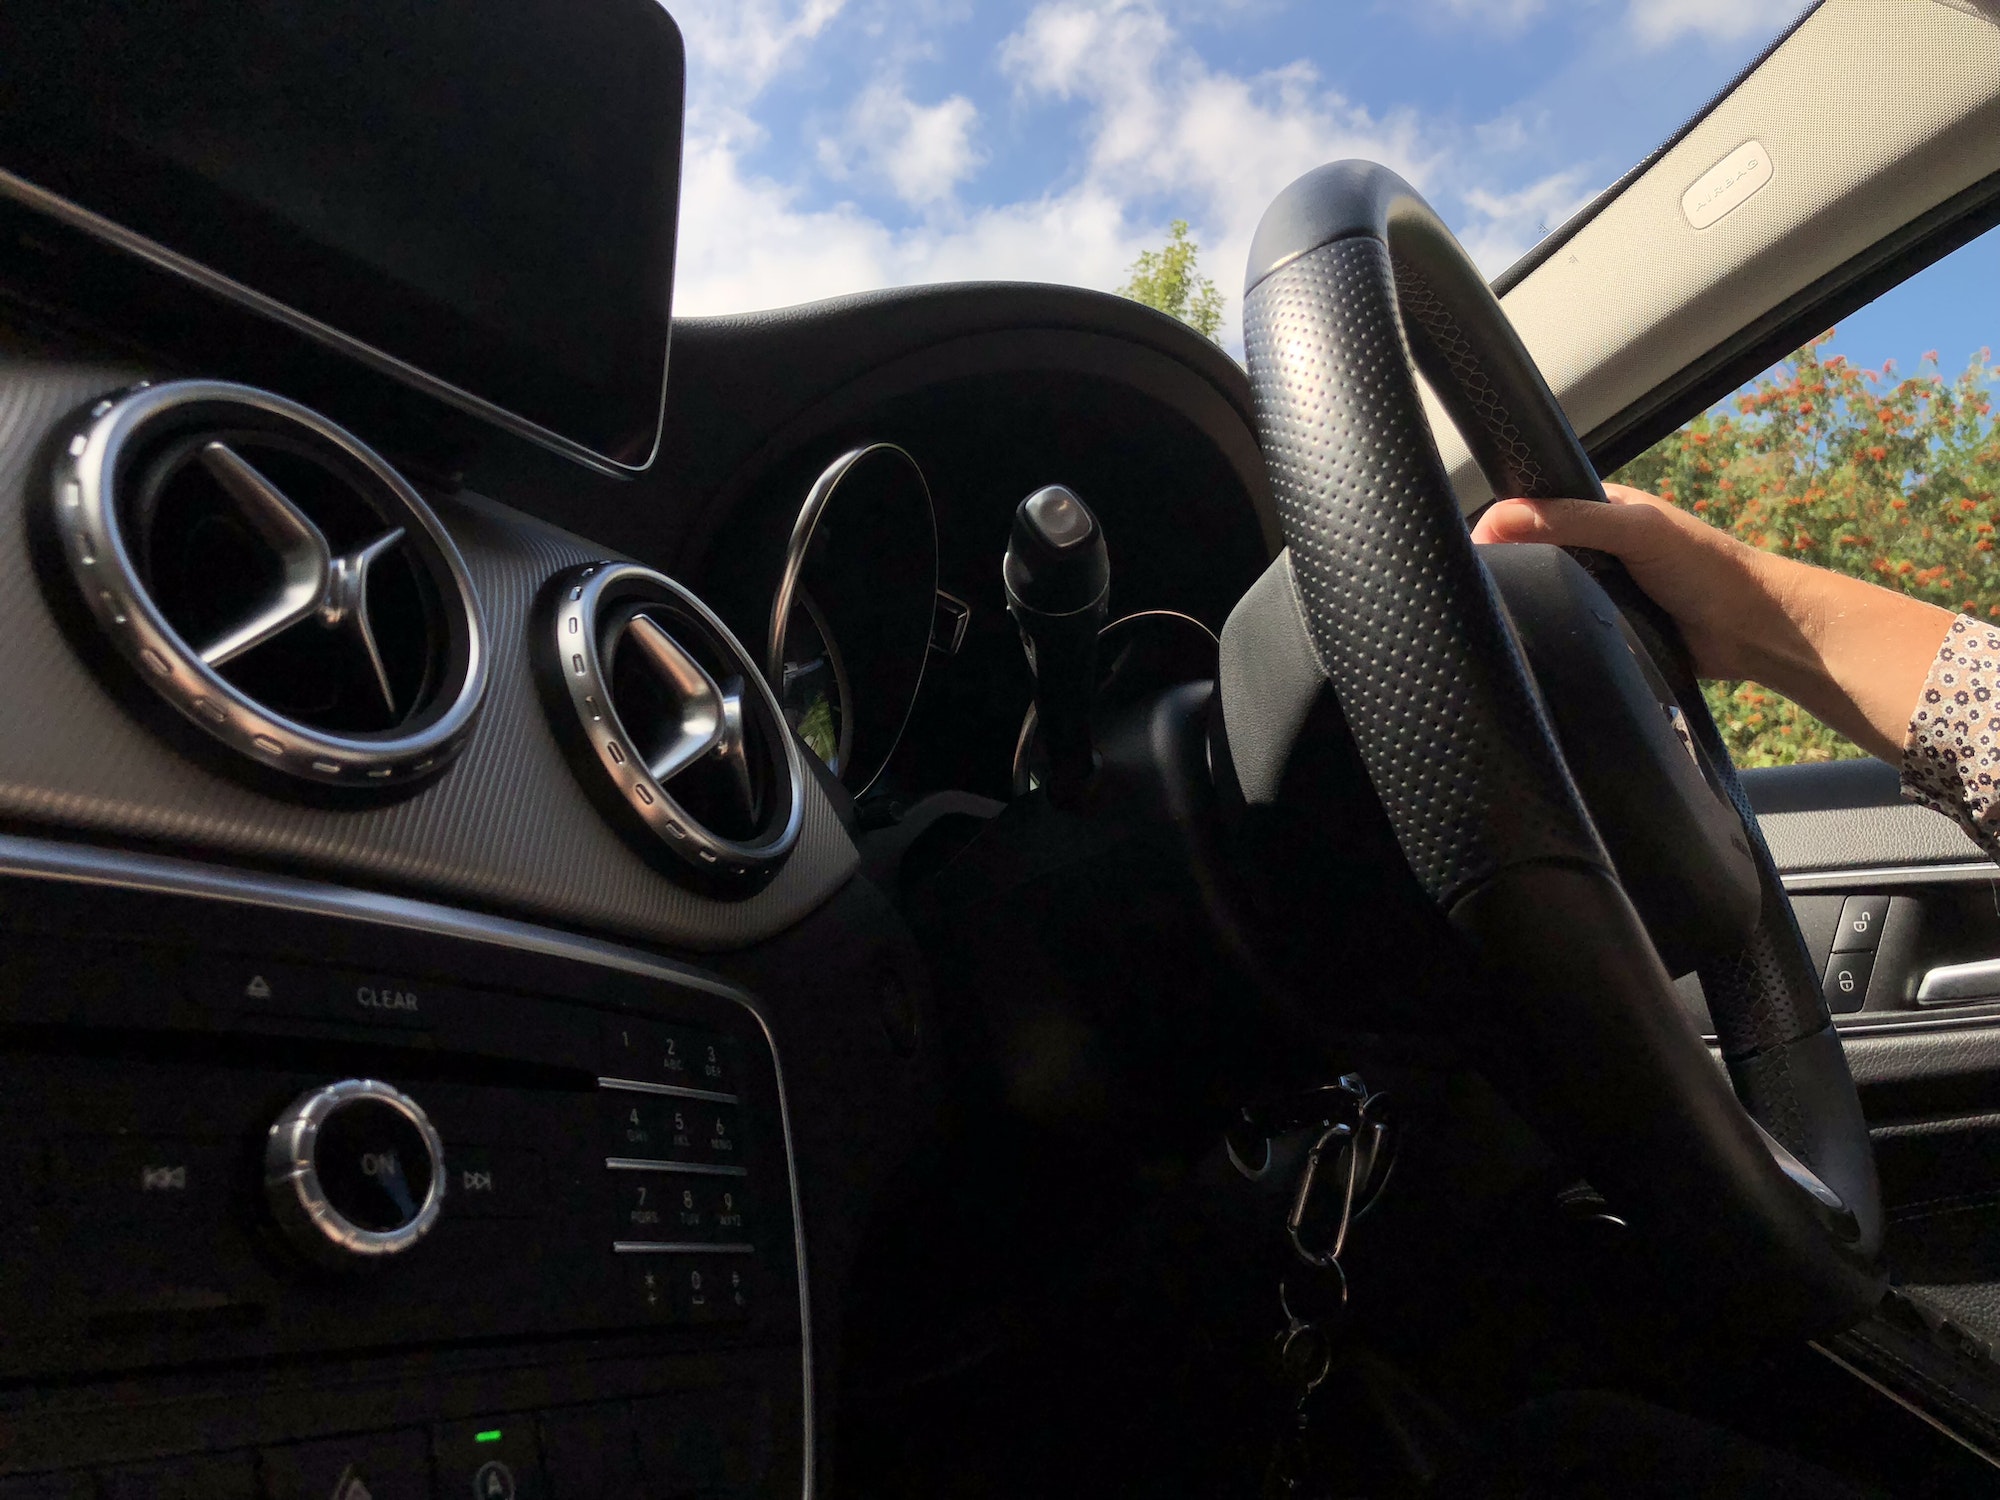 Mercedes – Technologie Car to X